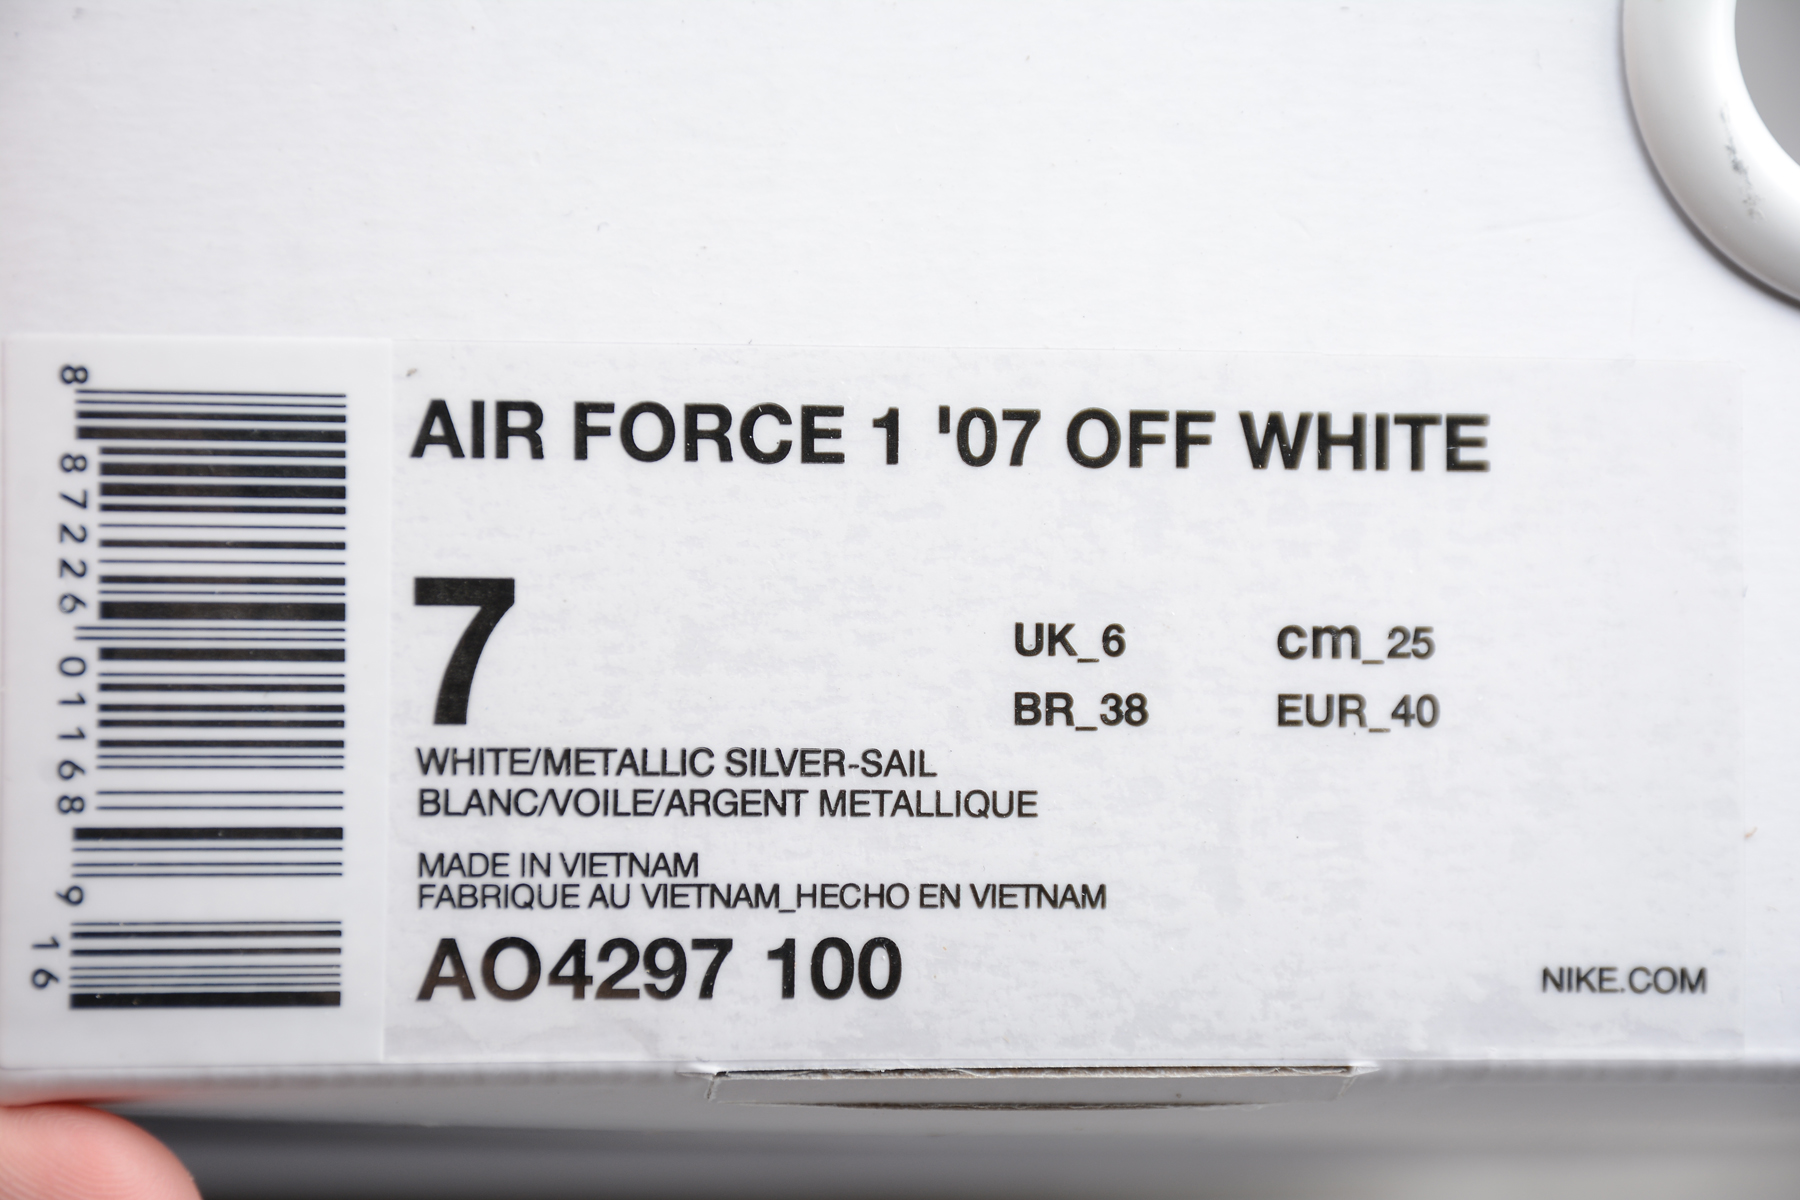 Nike Air Force 1 Low Virgil Abloh Off-White Complexcon - AO4297-100